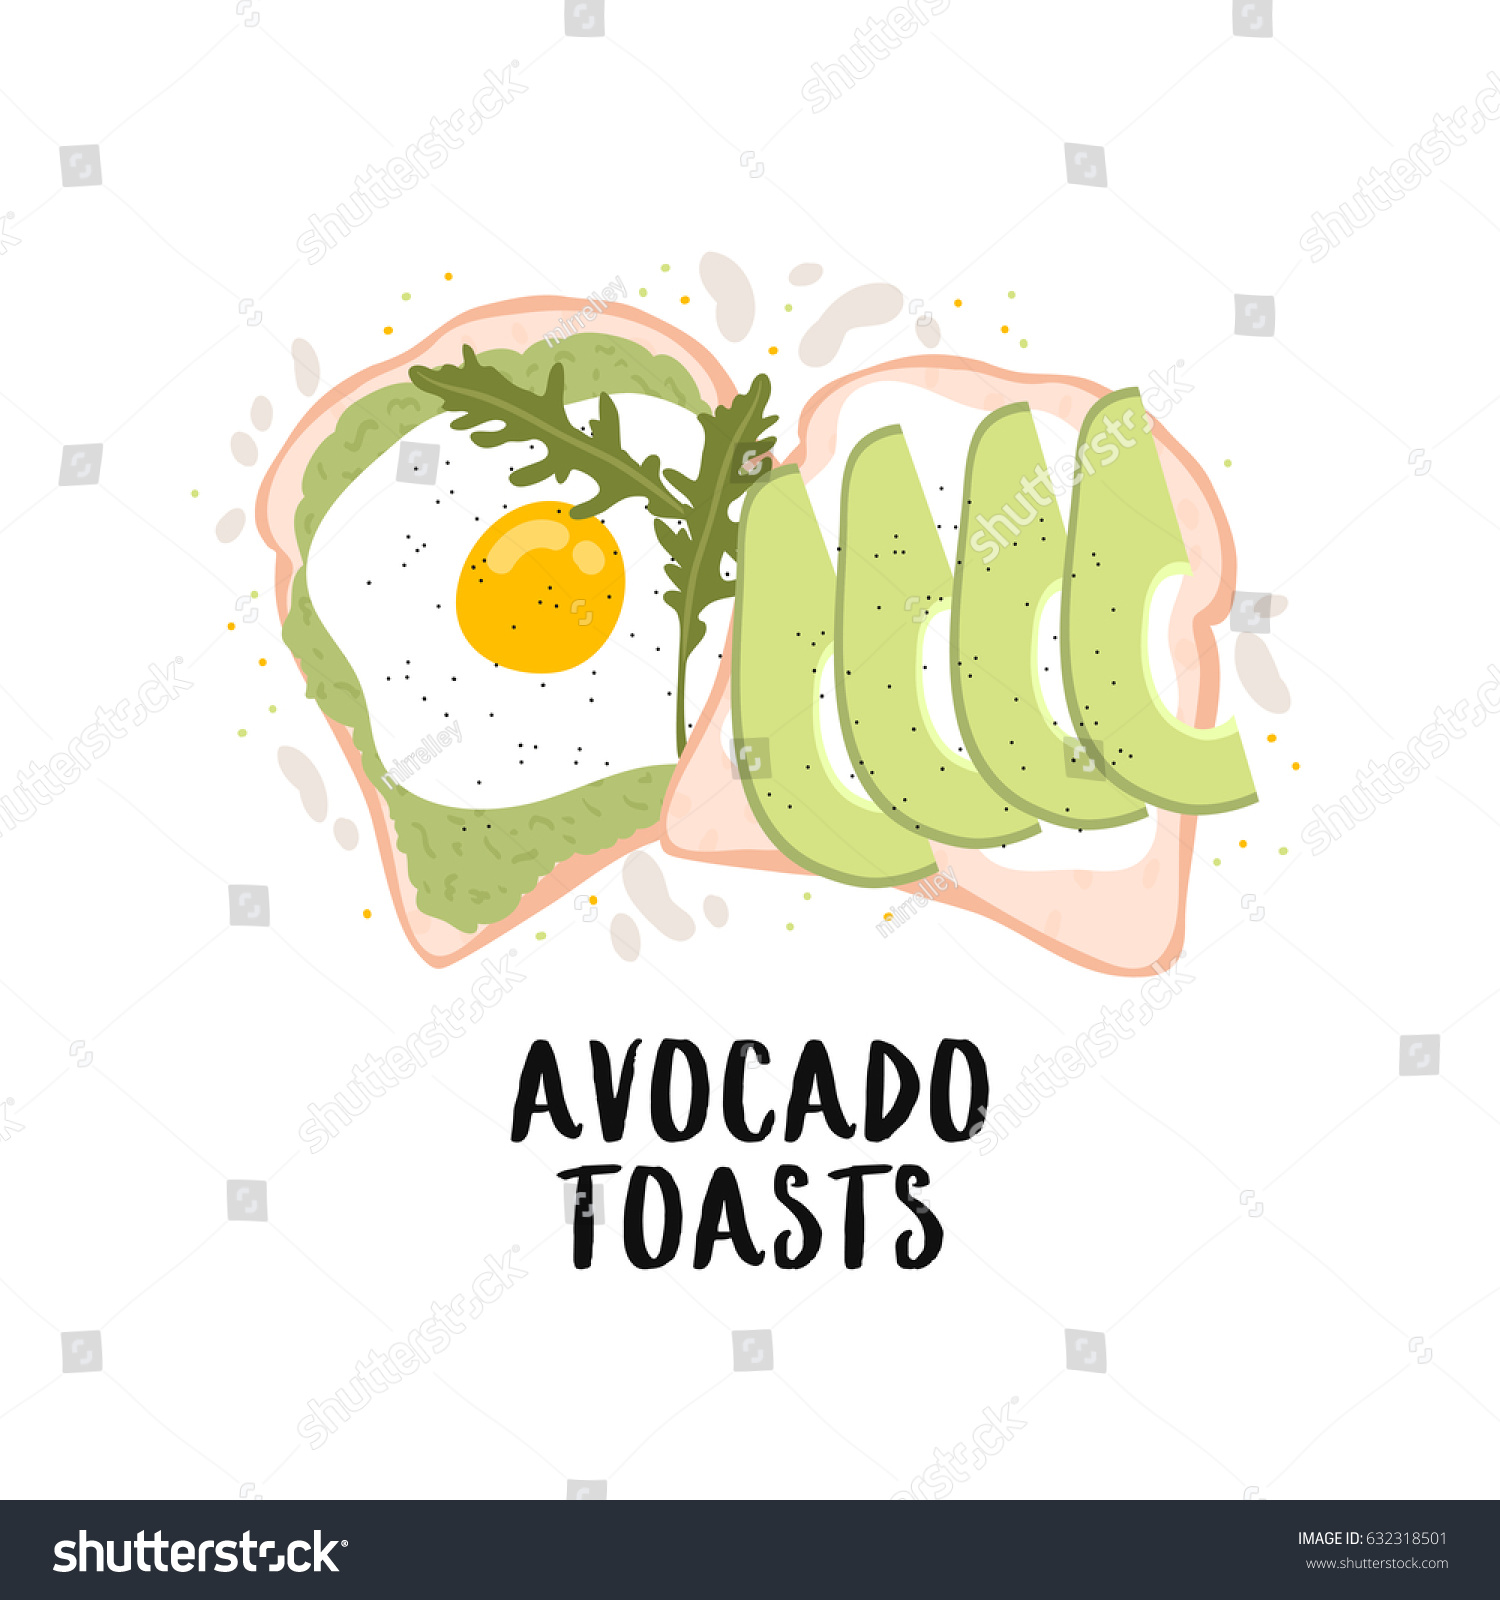 SVG of cute illustration of simple avocado toasts breakfast on white background. can be used for cards and posters or other your designs ideas svg